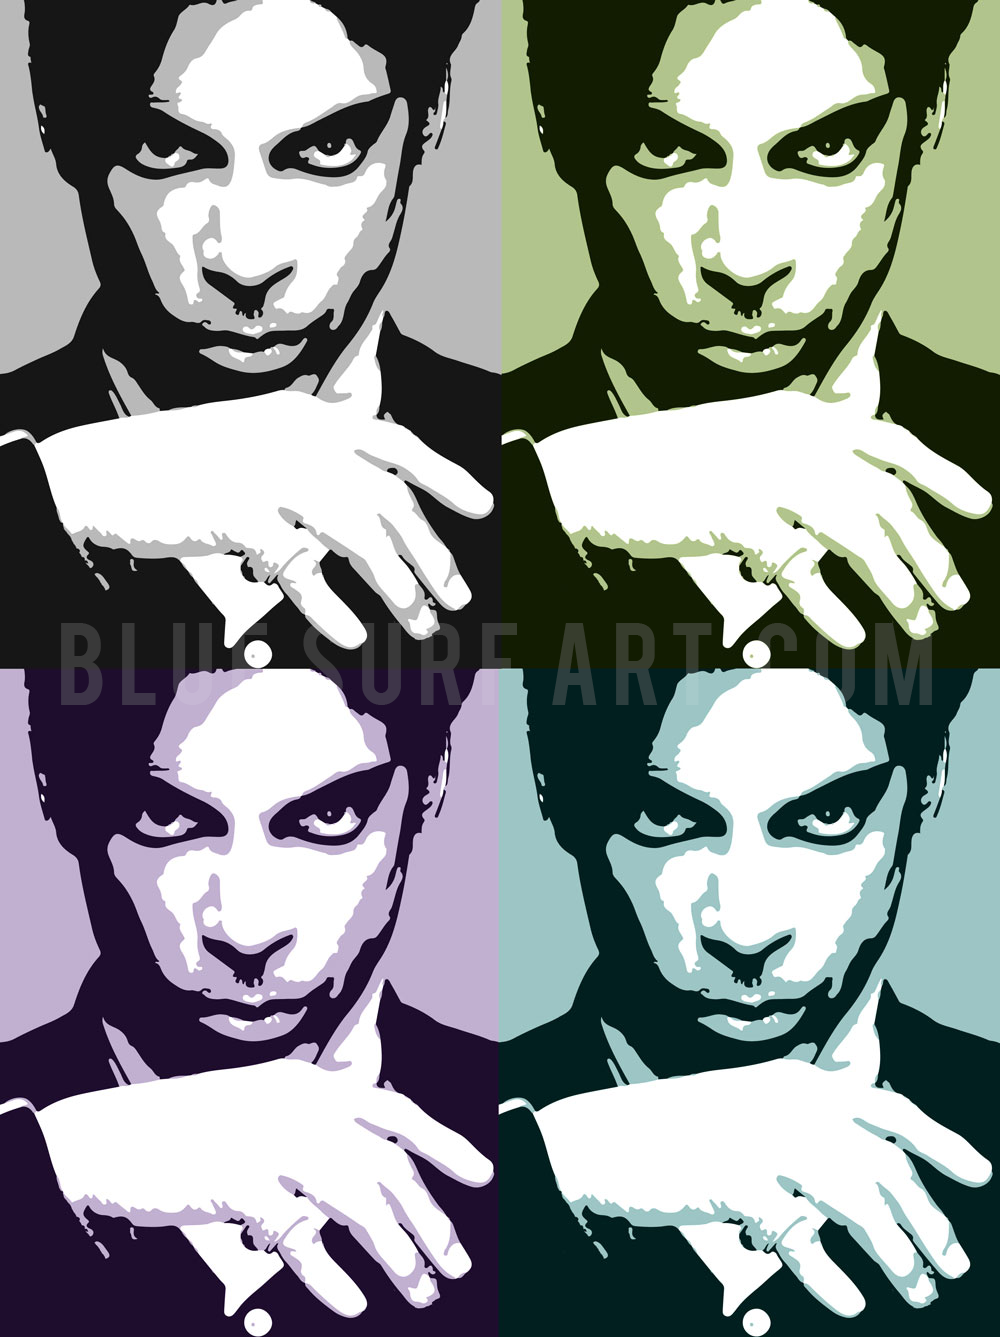 Prince Four Panel Oil Painting on Canvas by Blue Surf Art